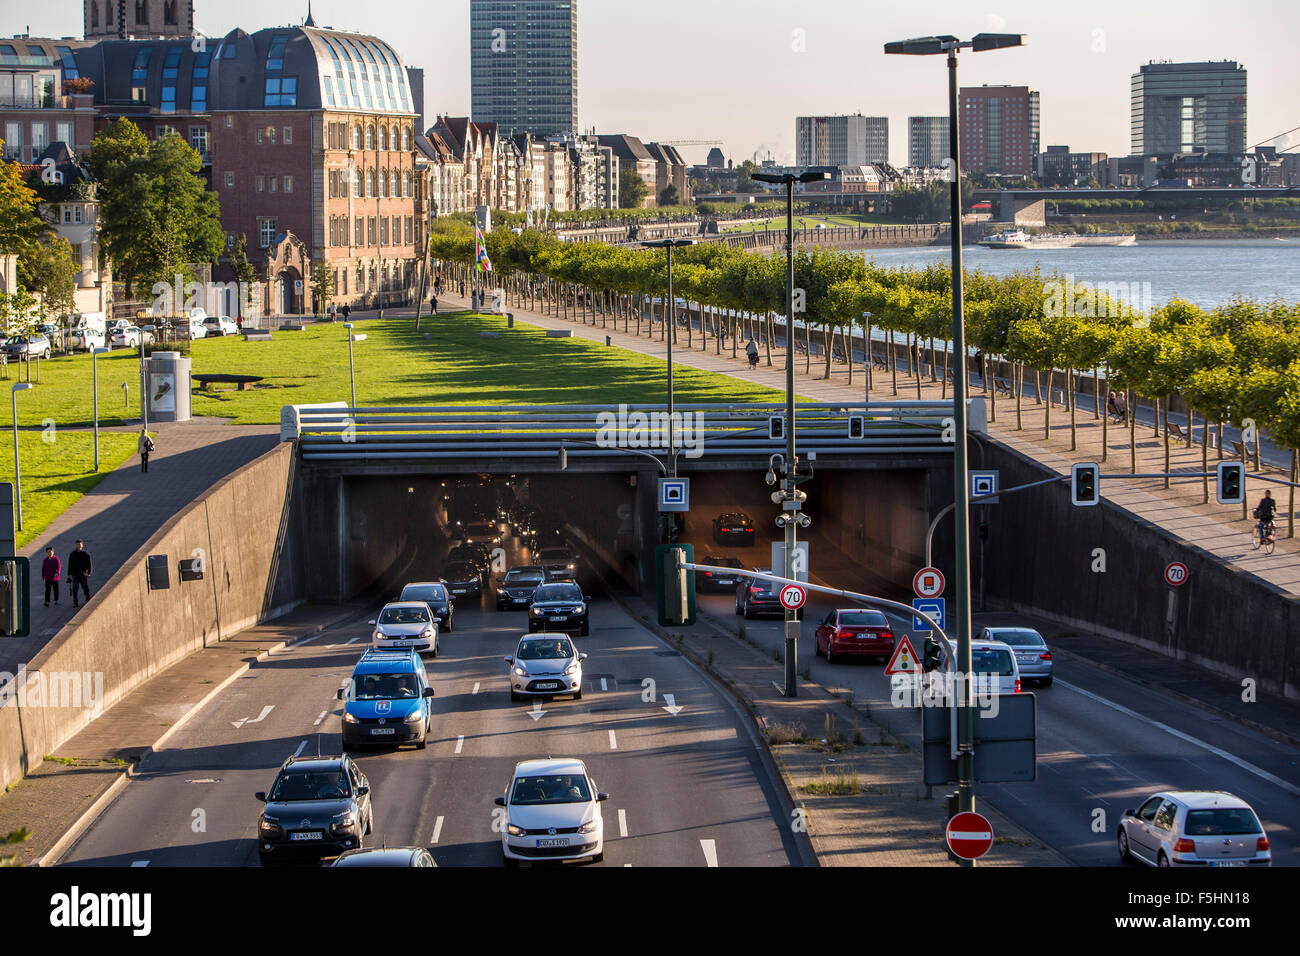 Traffic tunnel under the old town area, along river Rhine, Düsseldorf, Germany Stock Photo